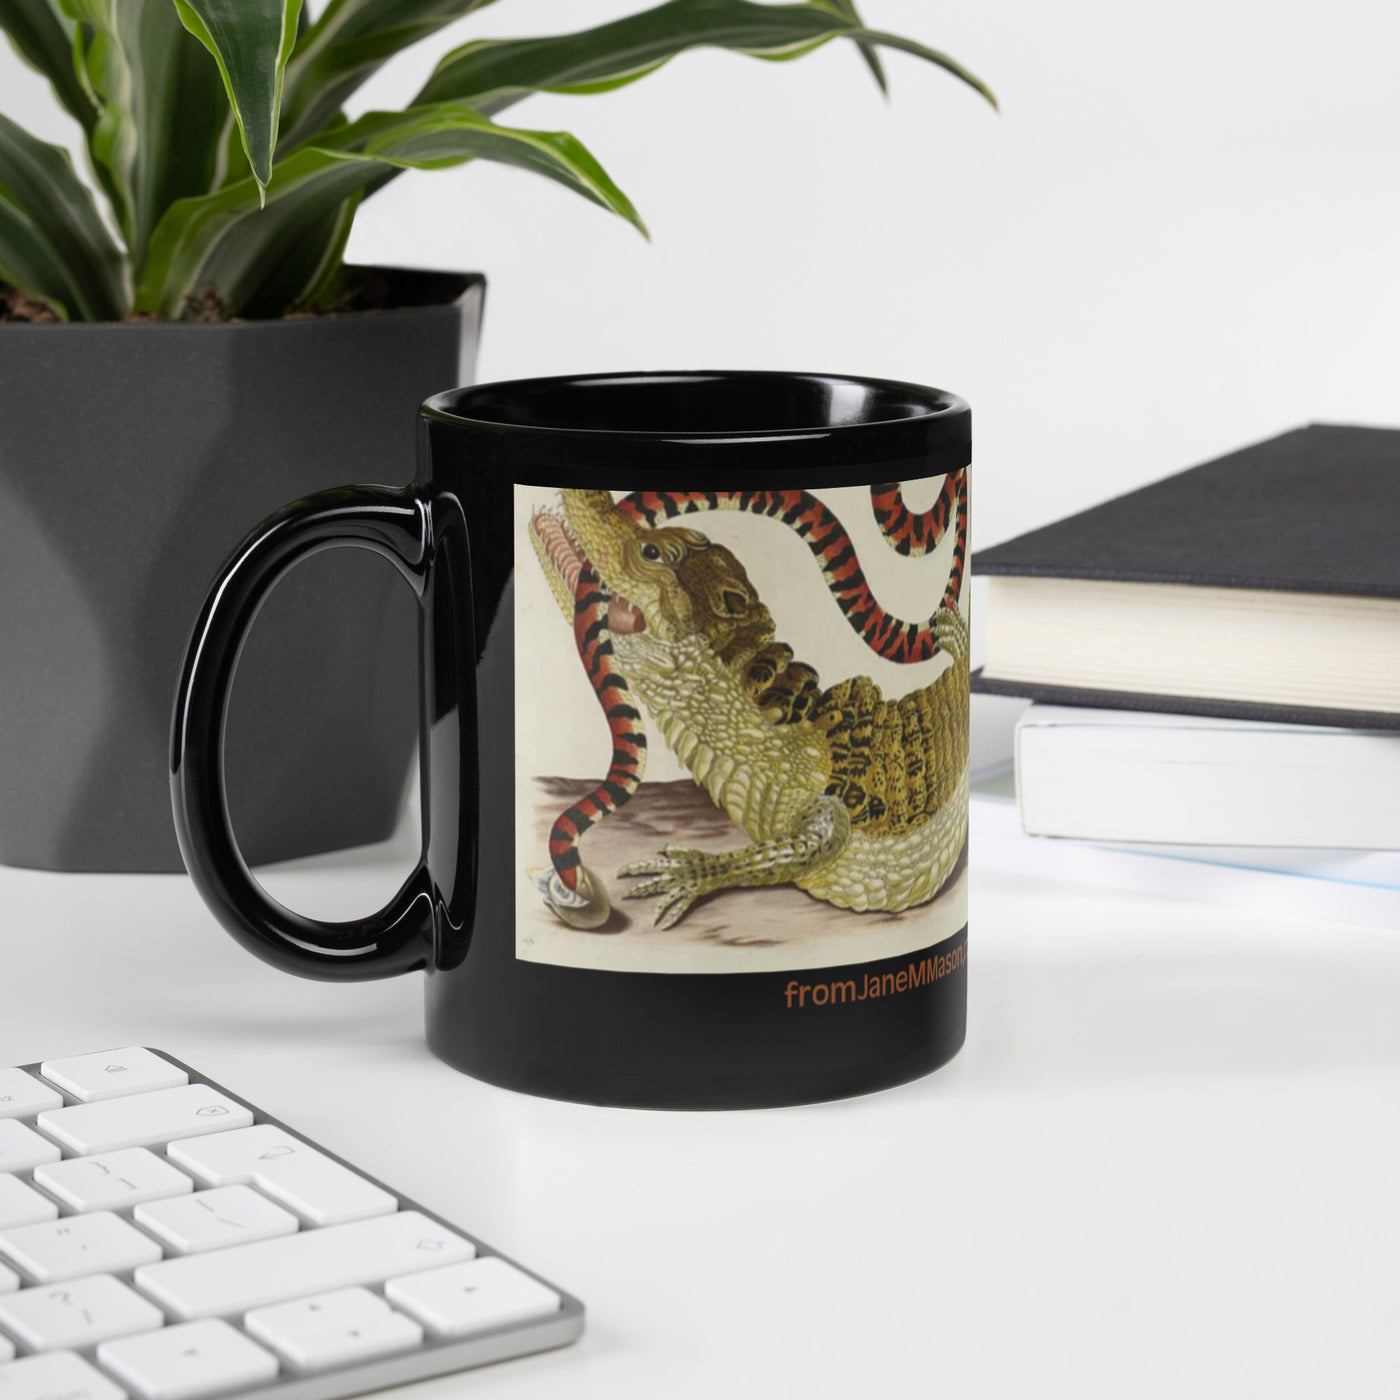  A black mug with black interior featuring an alligator wrestling with a large snake. Message is: Kindly wait until after my coffee. The painting is by Maria Sibylla Merian,  approx. 1650. 